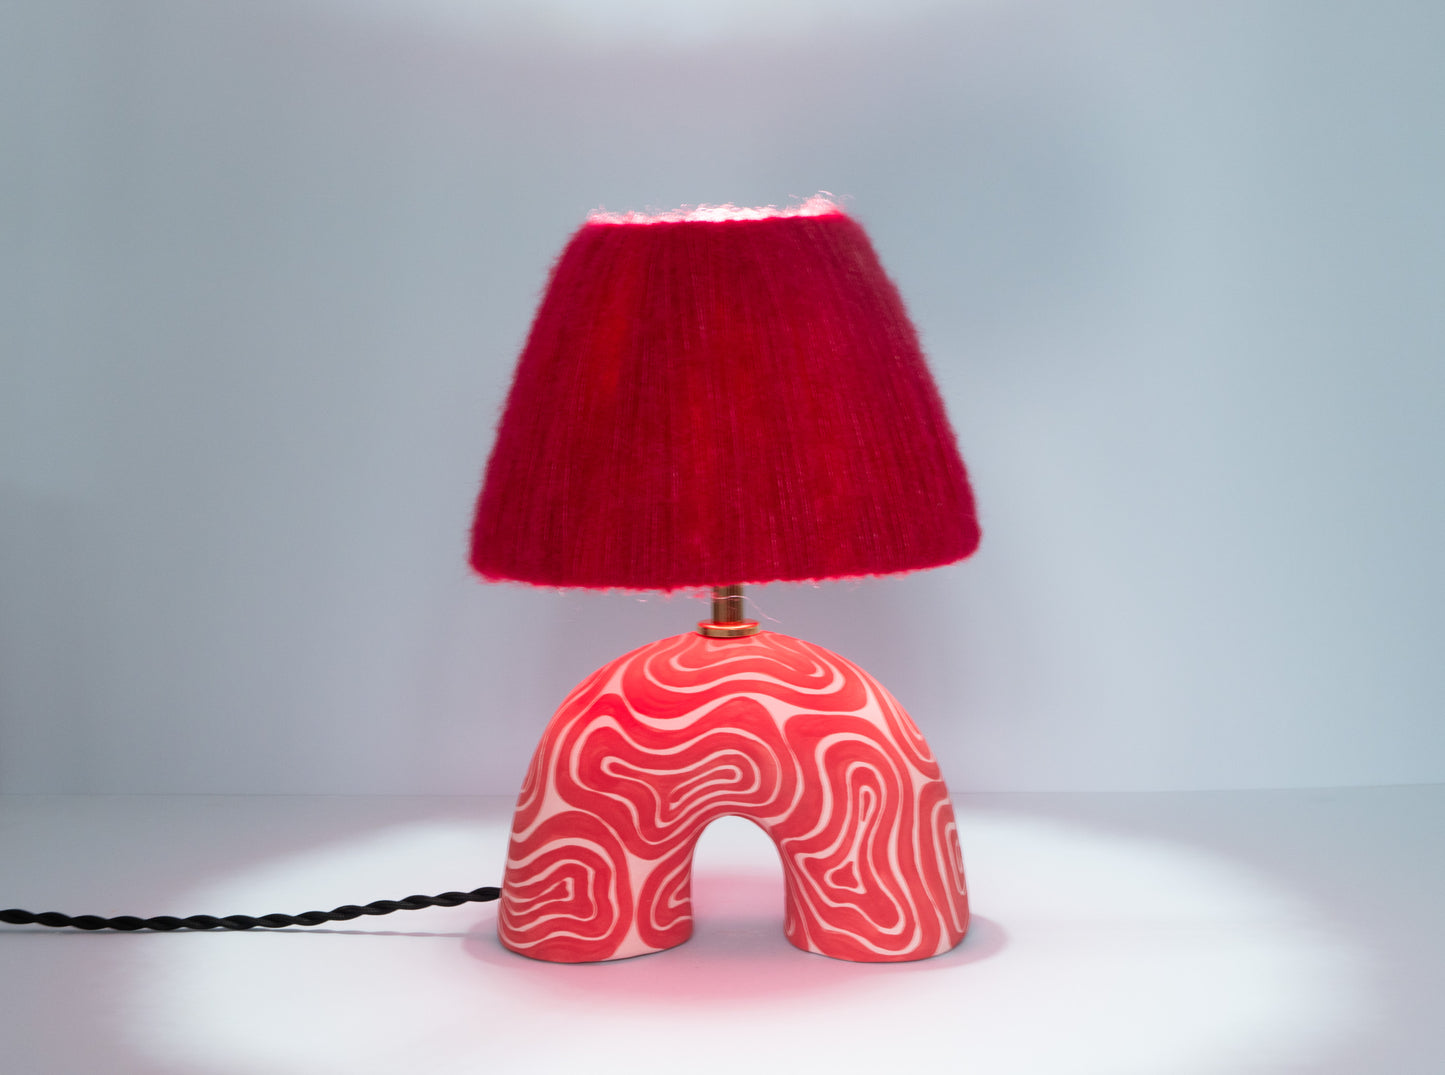 'Me' Table Lamp - Pink and Red Swirl